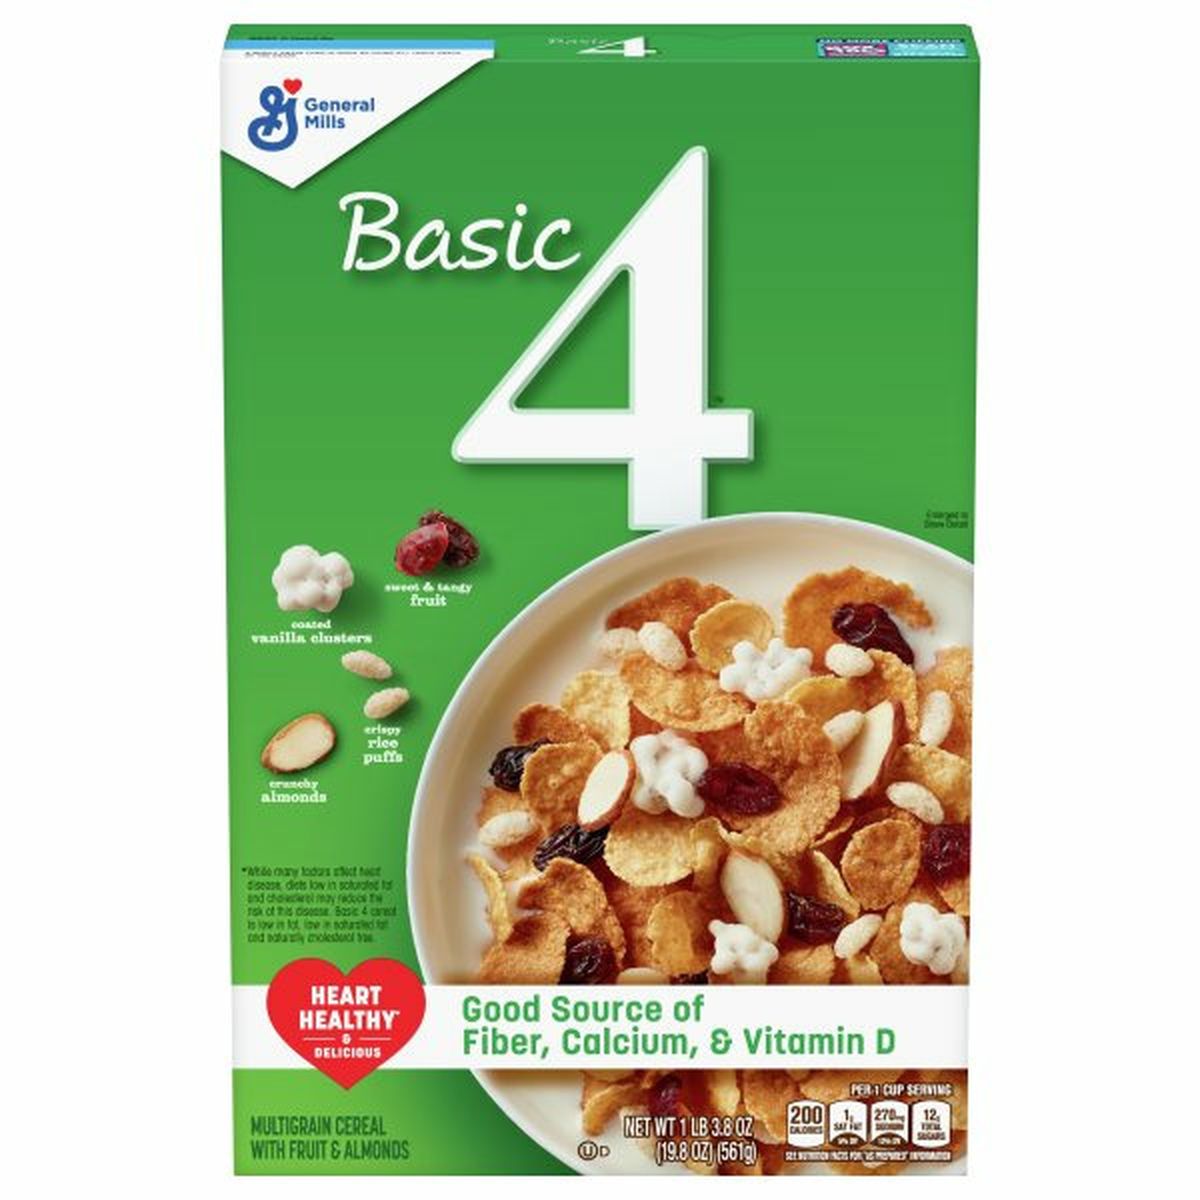 Calories in Basic Four Multigrain Cereal, with Fruit & Almonds